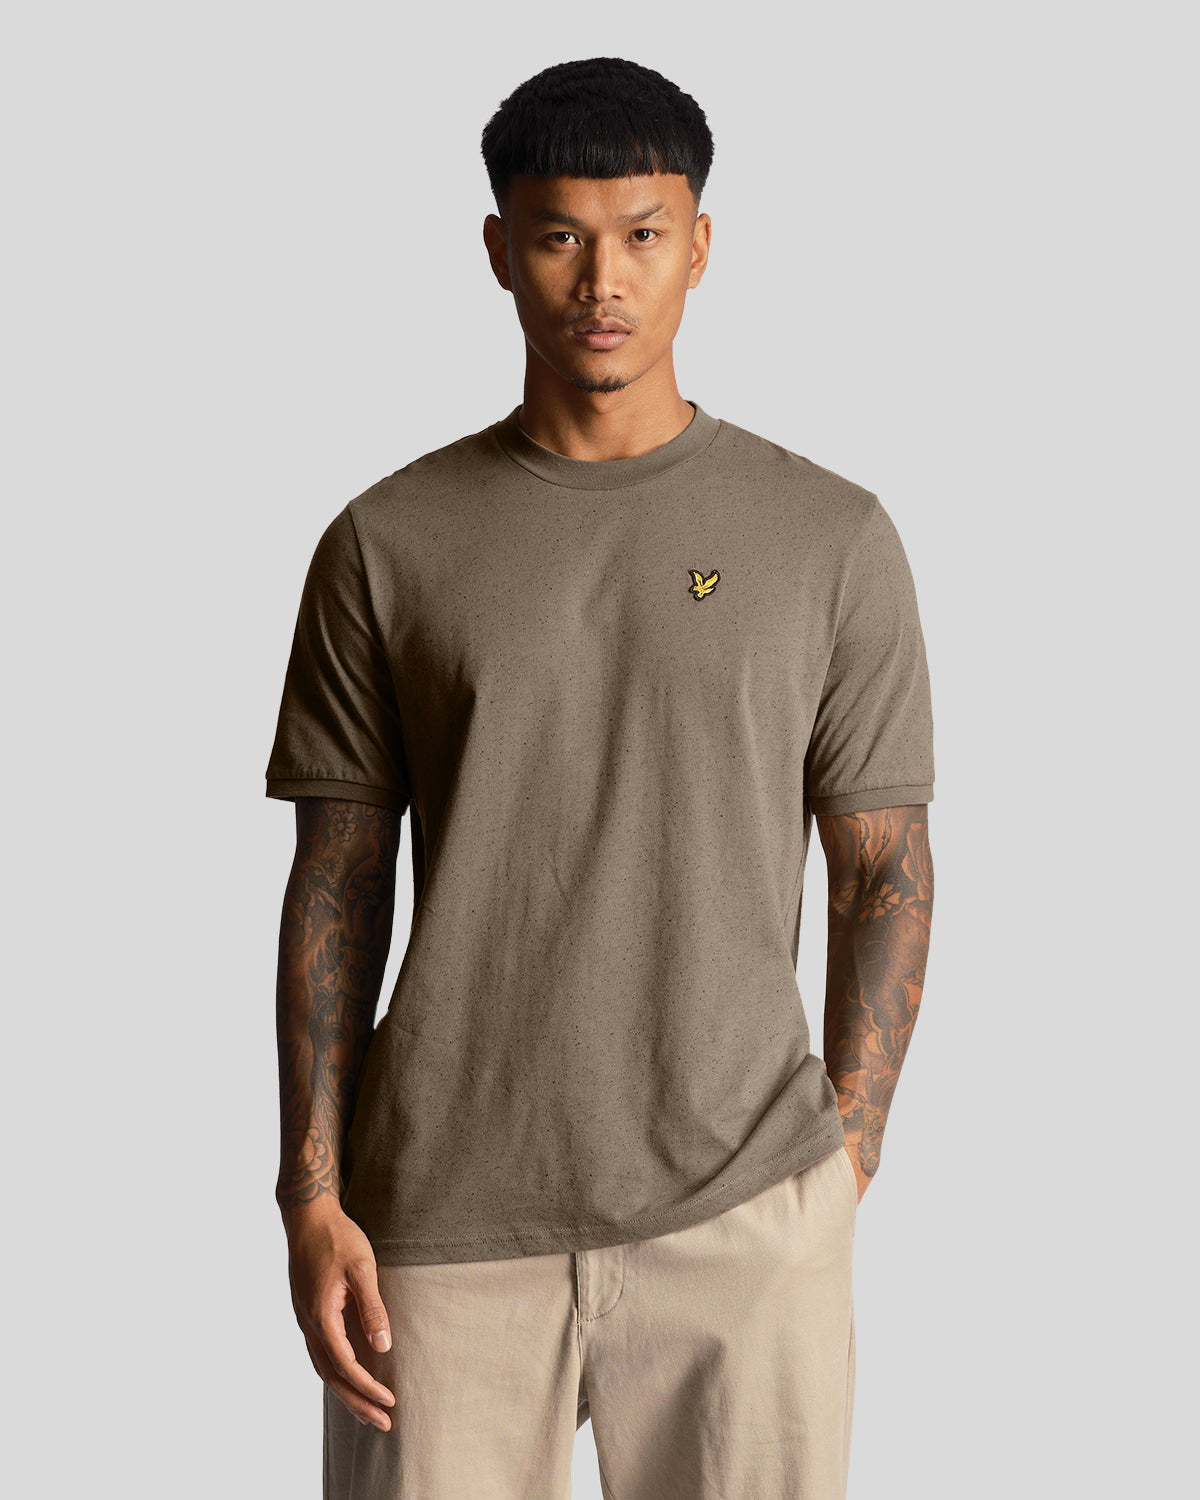 Lyle & Scott Mens Donegal T-Shirt in Brown - XXL product